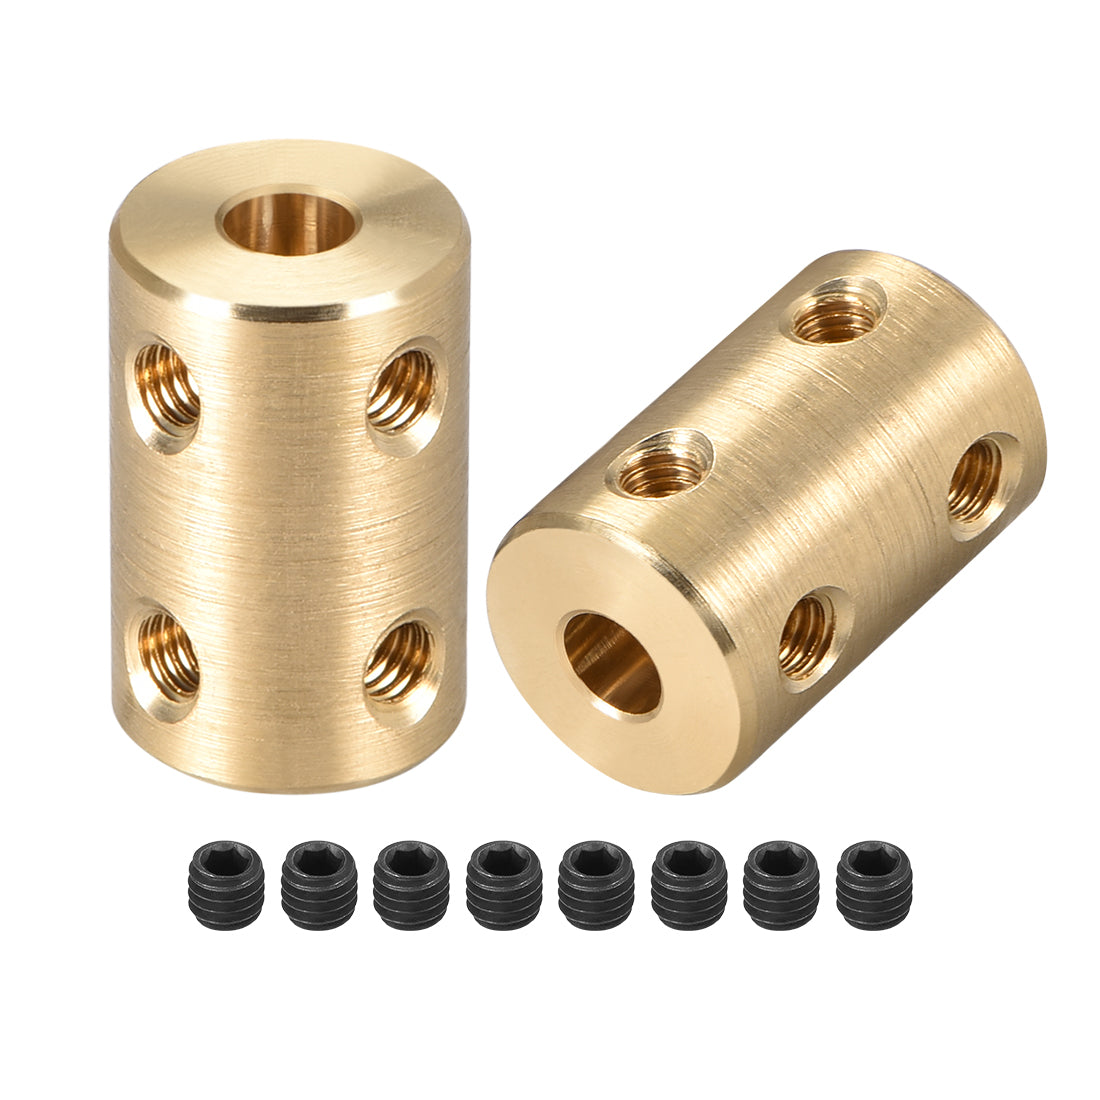 uxcell Uxcell Shaft Coupling 5mm to 5mm Bore L22xD14 Robot Motor Wheel Rigid Coupler Connector Gold Tone 2 Pcs